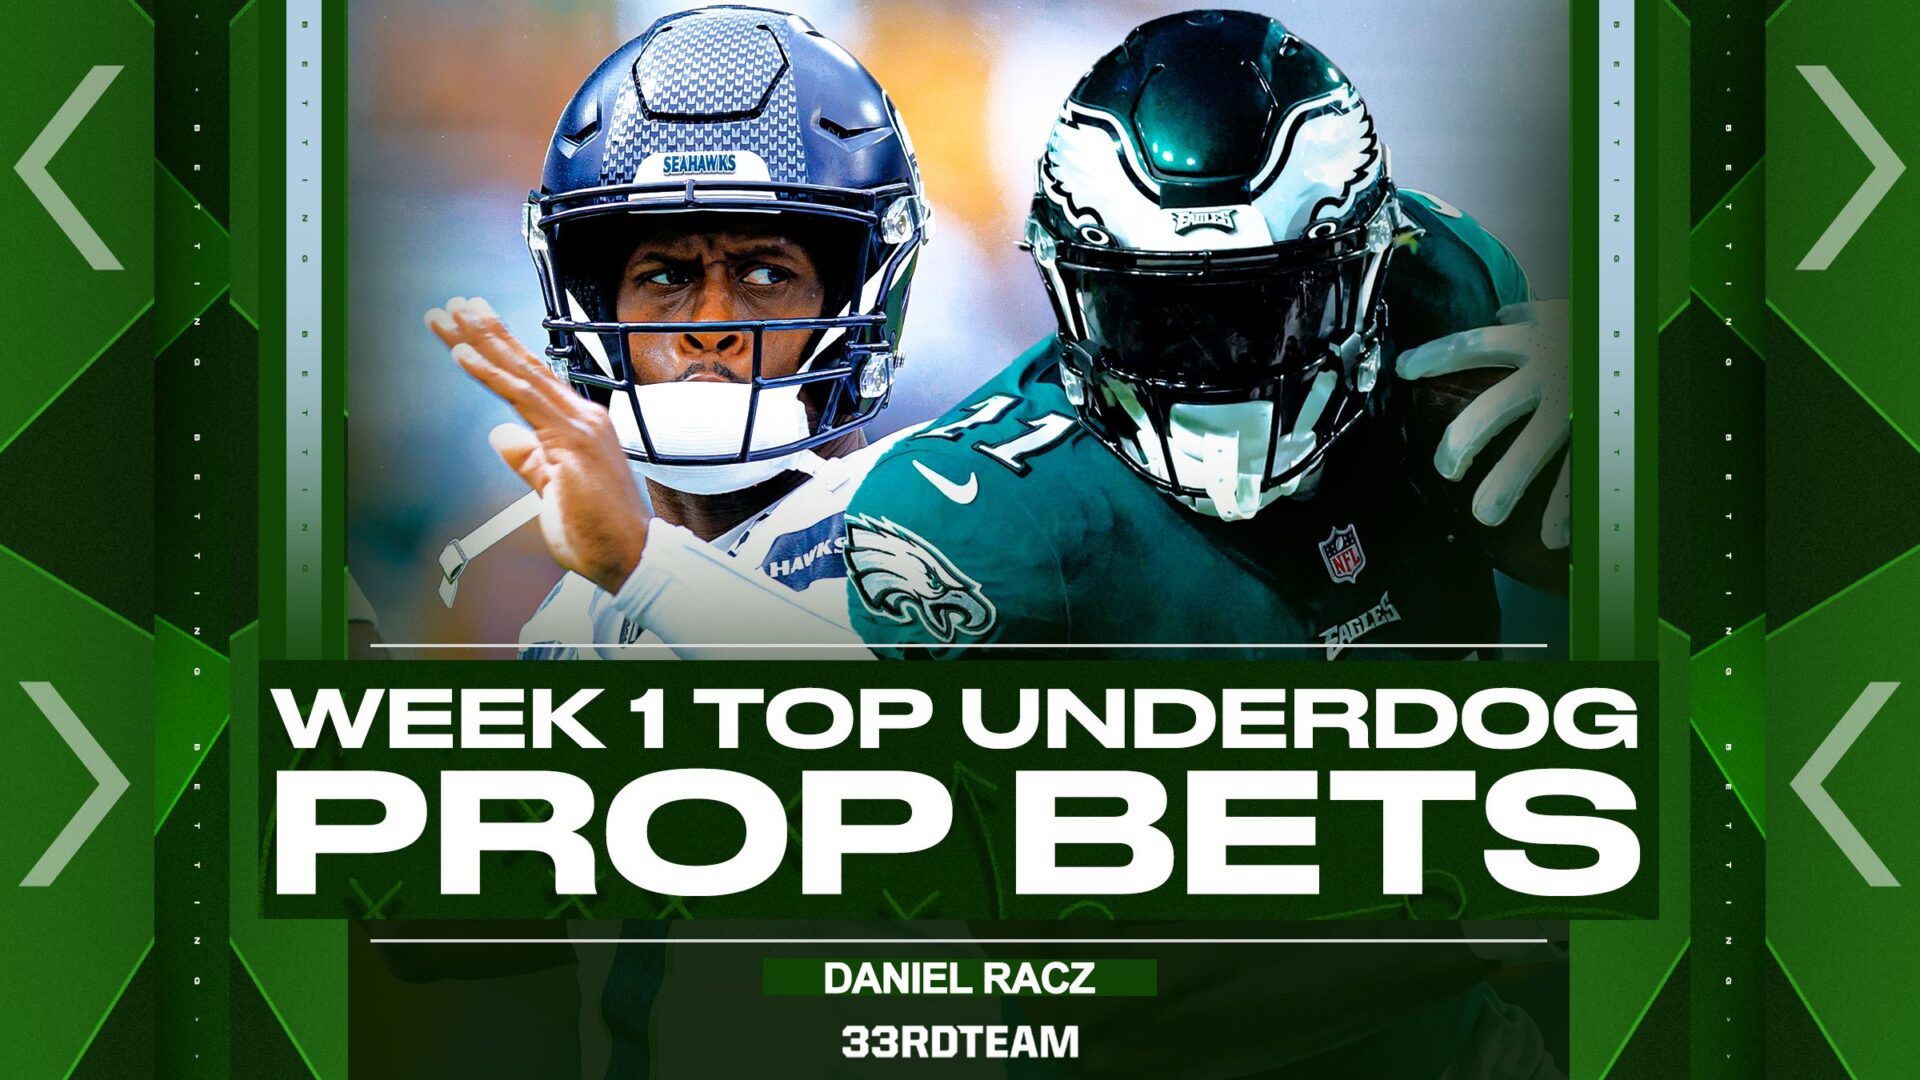 NFL Week 1 Underdogs: Analysis & Parlays For Betting Upsets